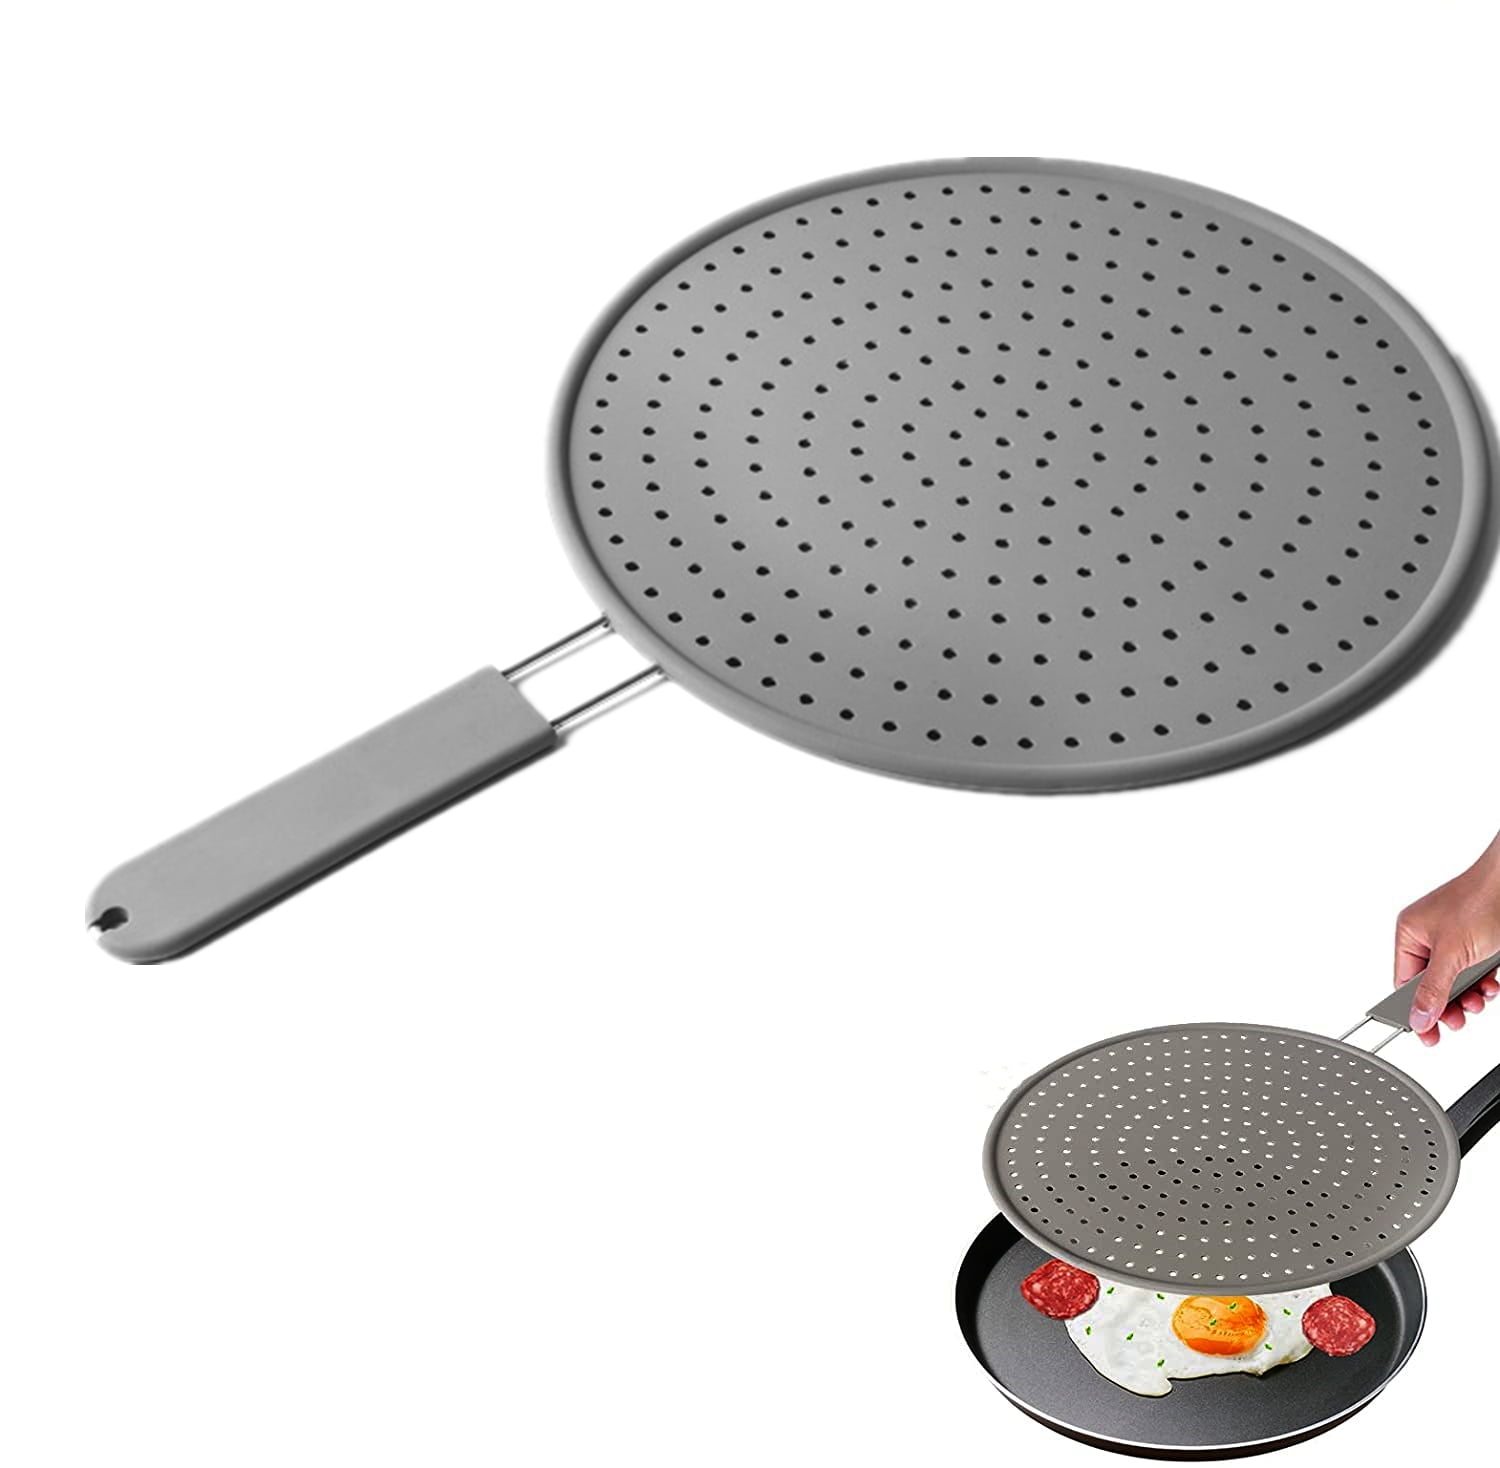 Pluokvzr NON-RUST Silicone Splatter Screen for Cooking - 11 inch Grease  Splatter Guard,and Grease Strainer Non-Stick,Food Safe & Heat Resistant  Splash Guard for Frying Pan 